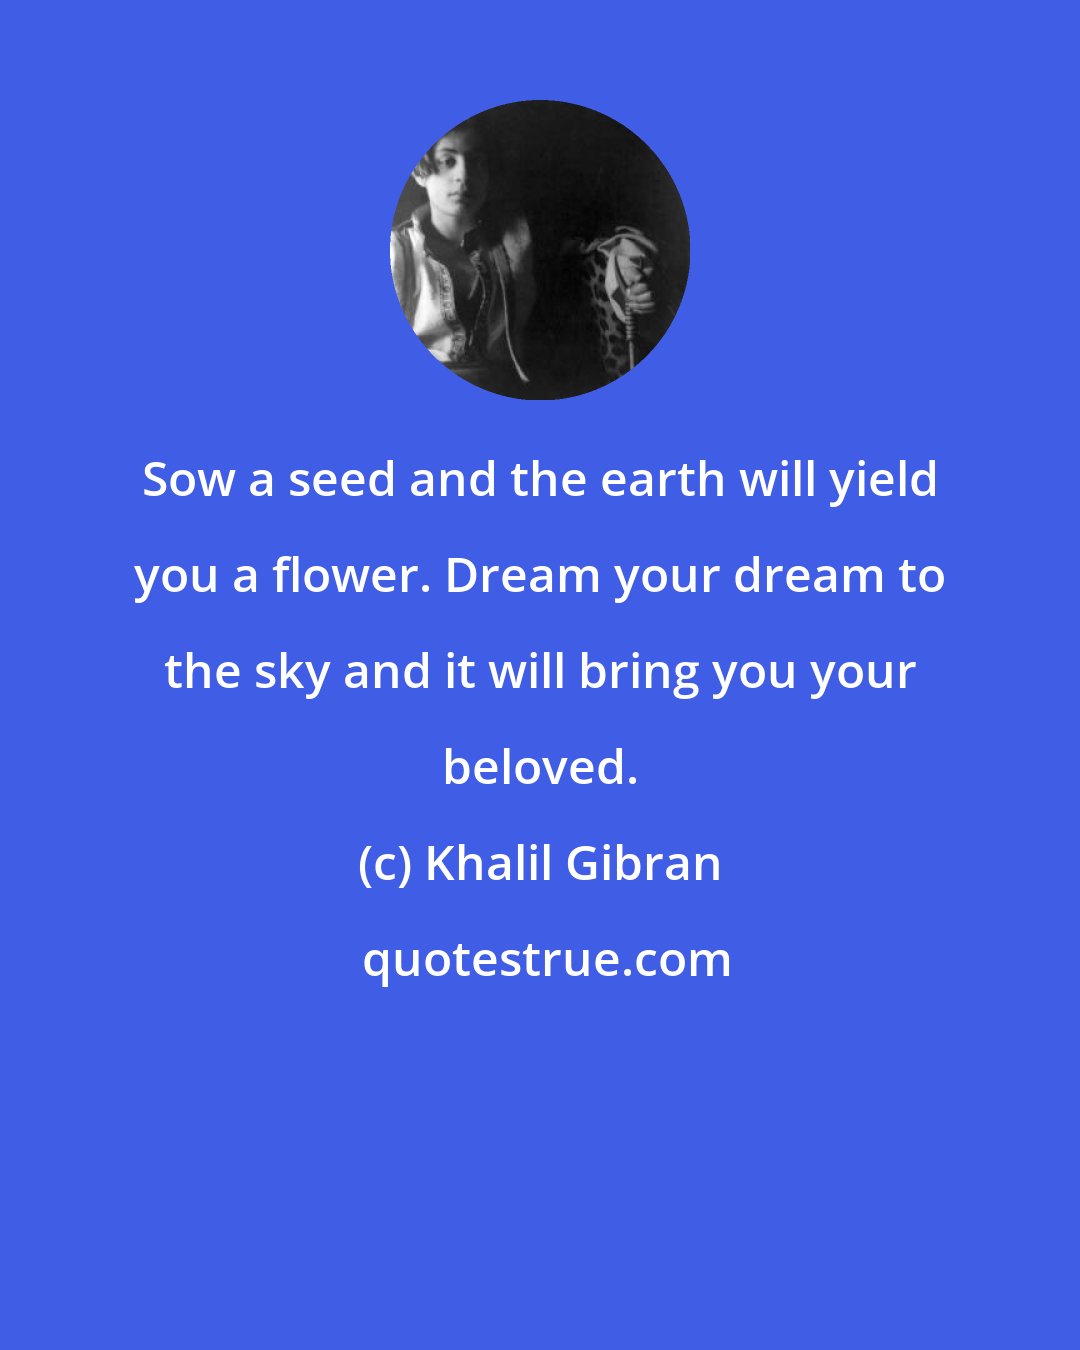 Khalil Gibran: Sow a seed and the earth will yield you a flower. Dream your dream to the sky and it will bring you your beloved.